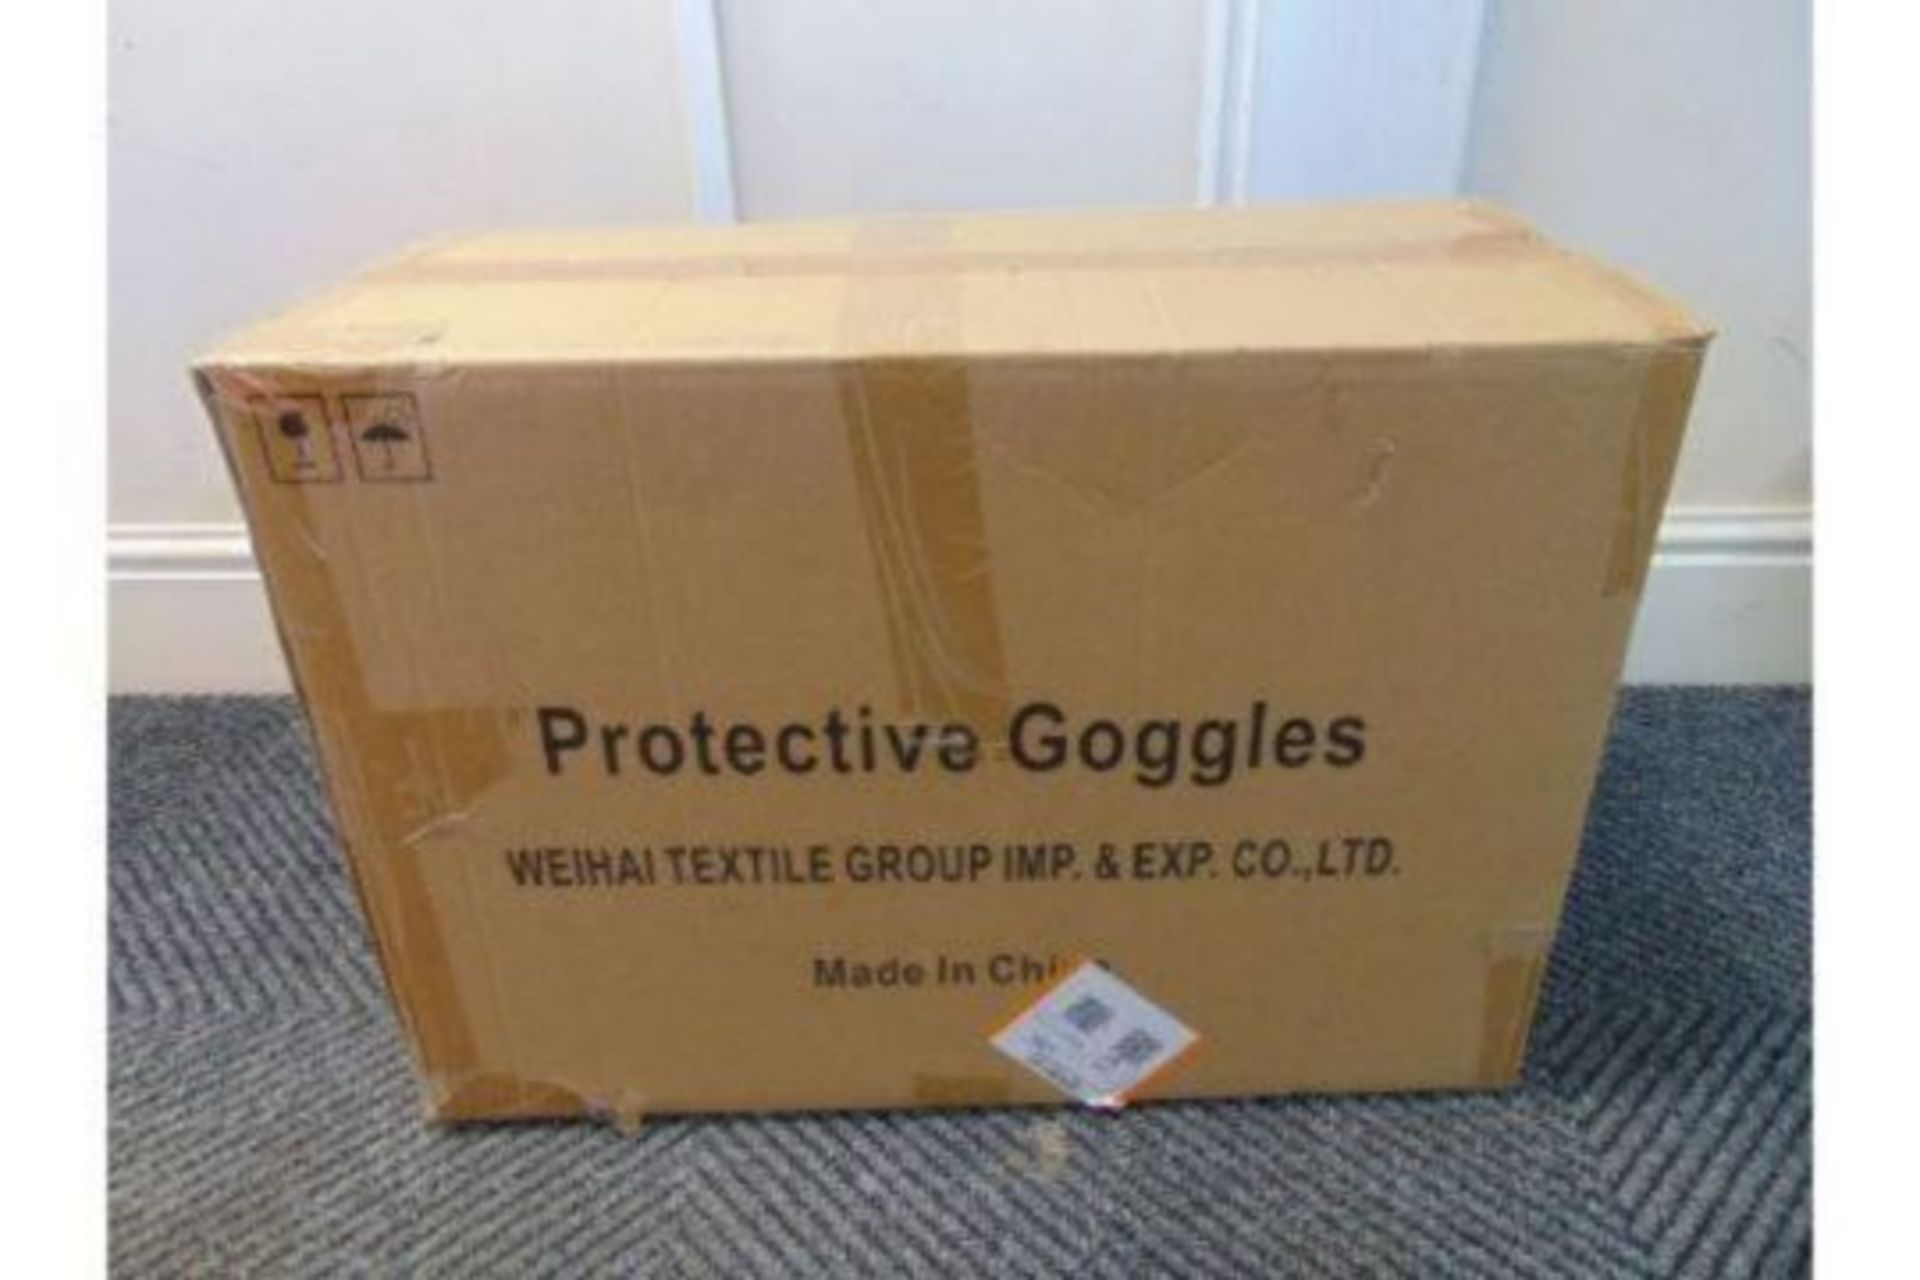 1440 Protective Goggles GLYZ1-1, 1 Pallet (18 Boxes, 80 per box) New Unissued Reserve Stock - Image 13 of 16